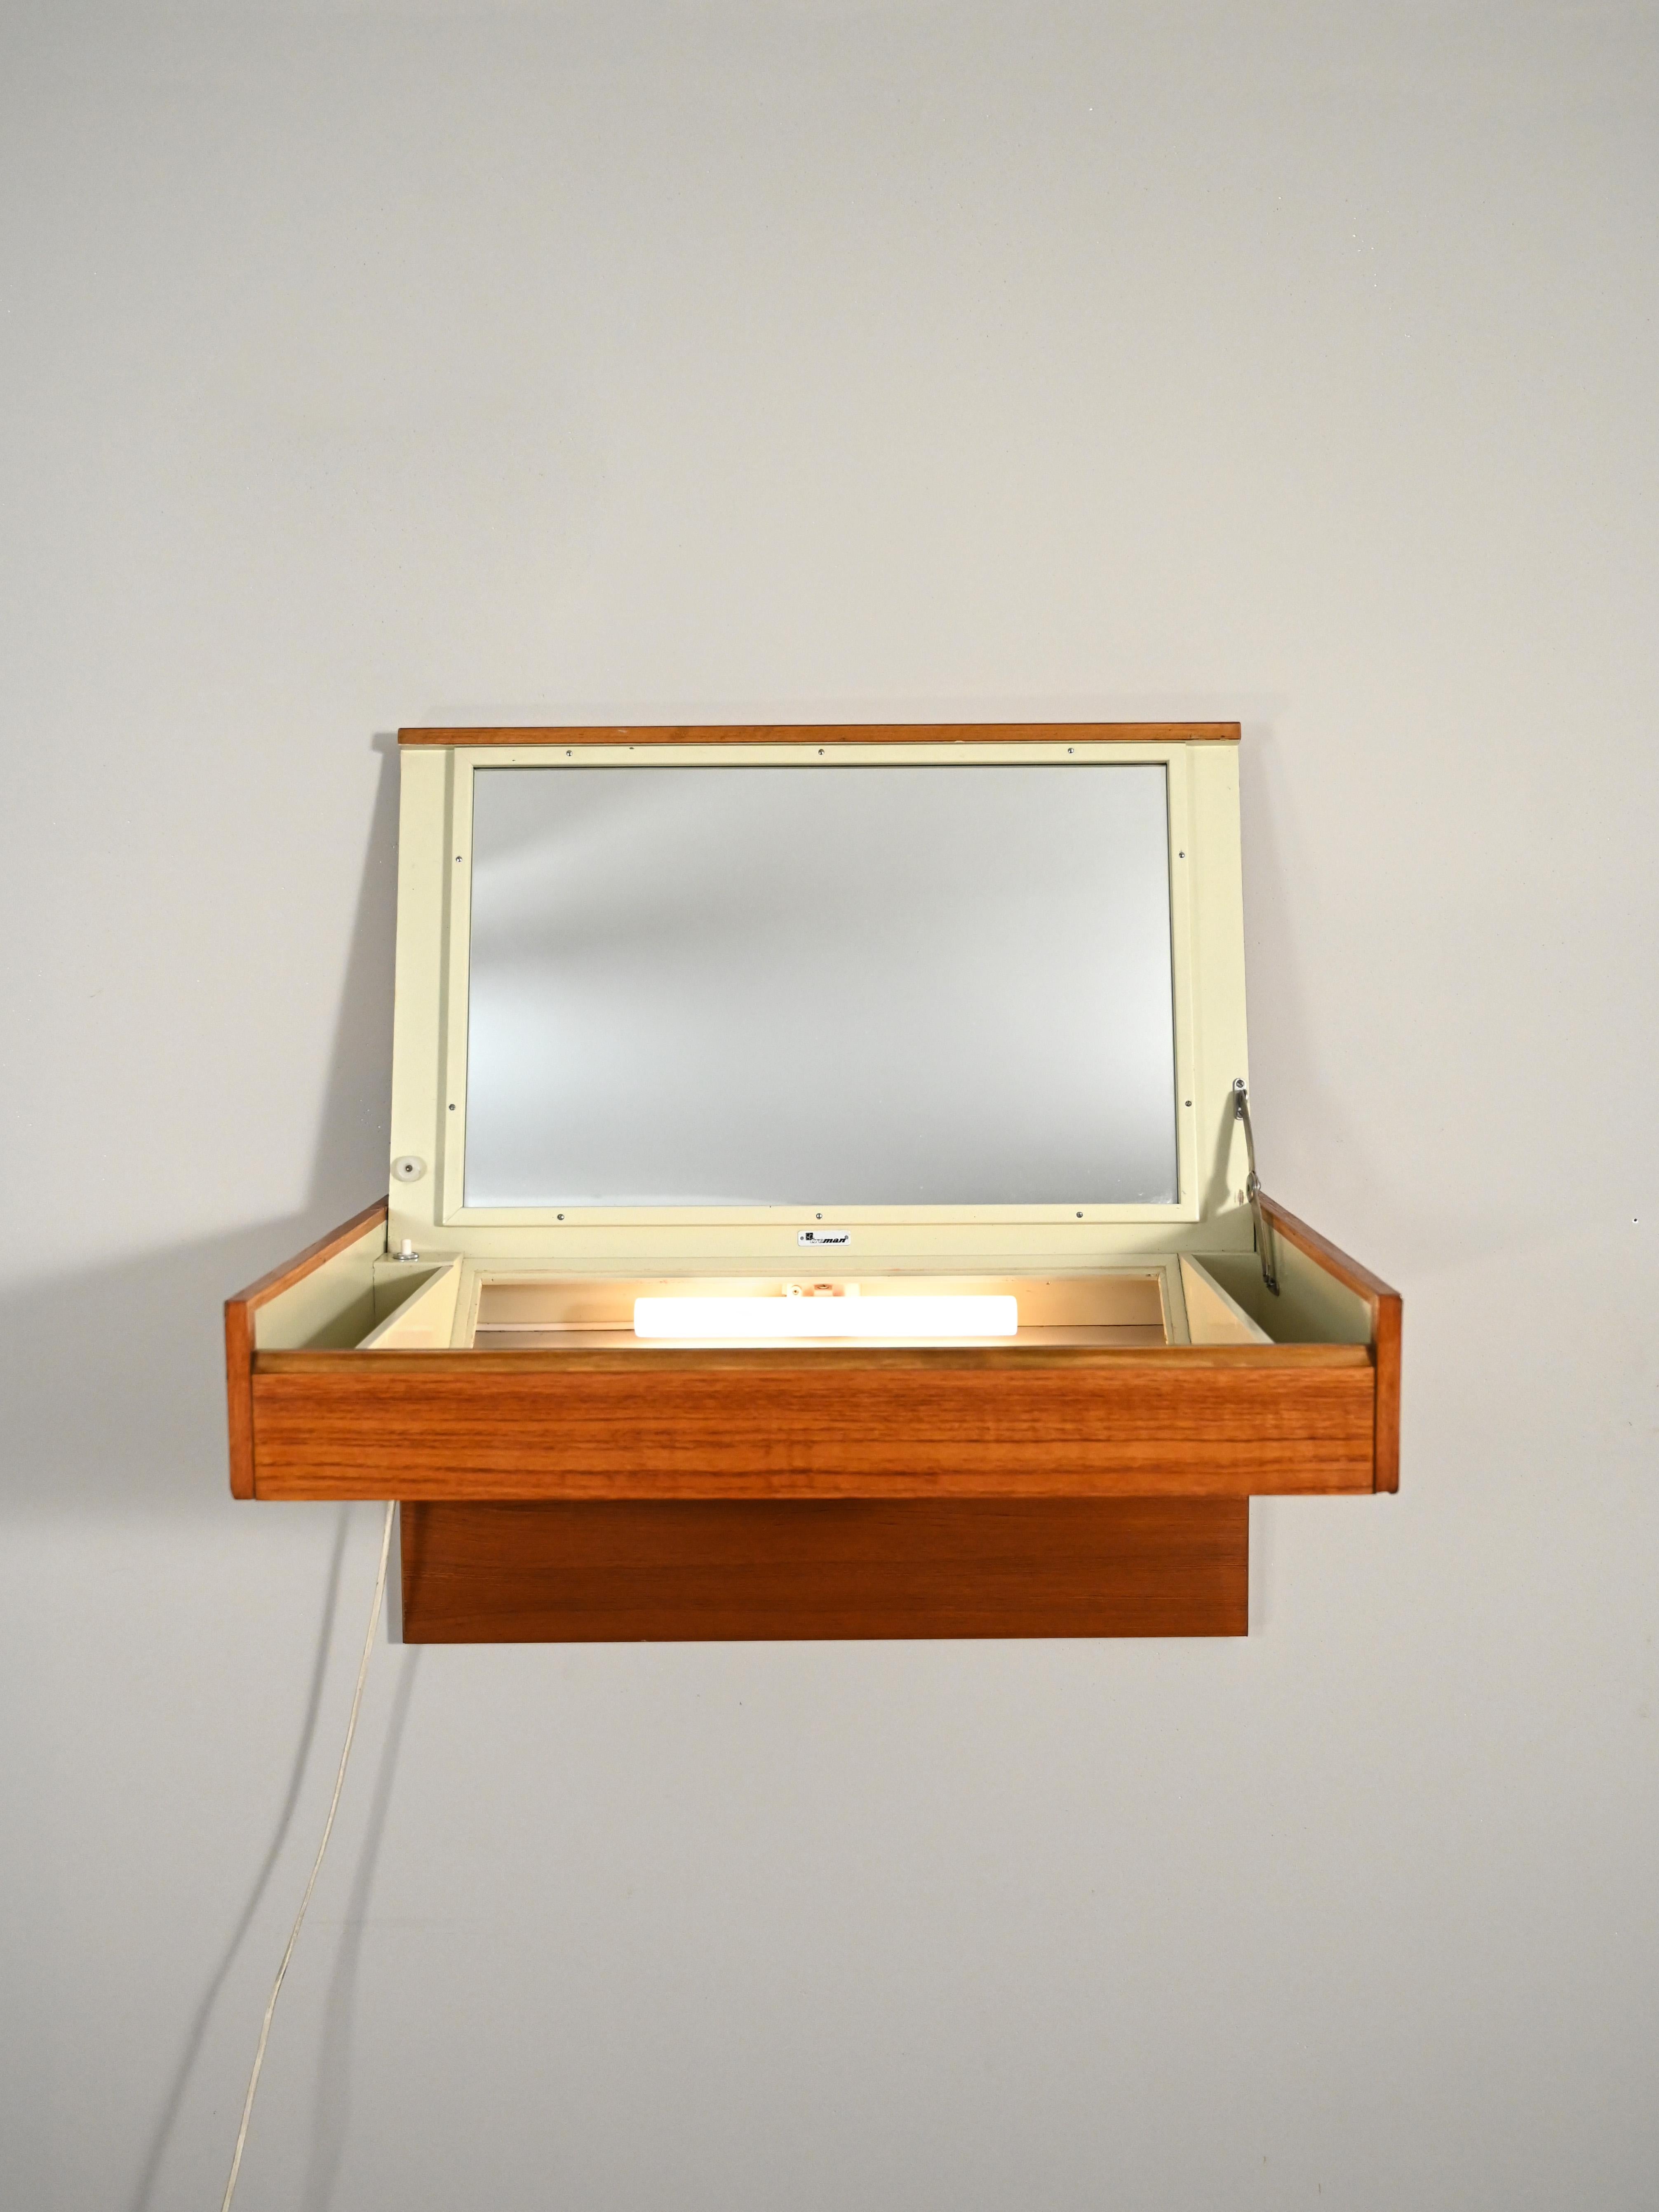 Suspended Scandinavian teak wood desk/toilet, the workmanship is vintage from the 1960s.

The lift-up top hides a large mirror, a compartment perfect for storage and a light.

It attaches to the wall with 4 screws.

Good condition - Good